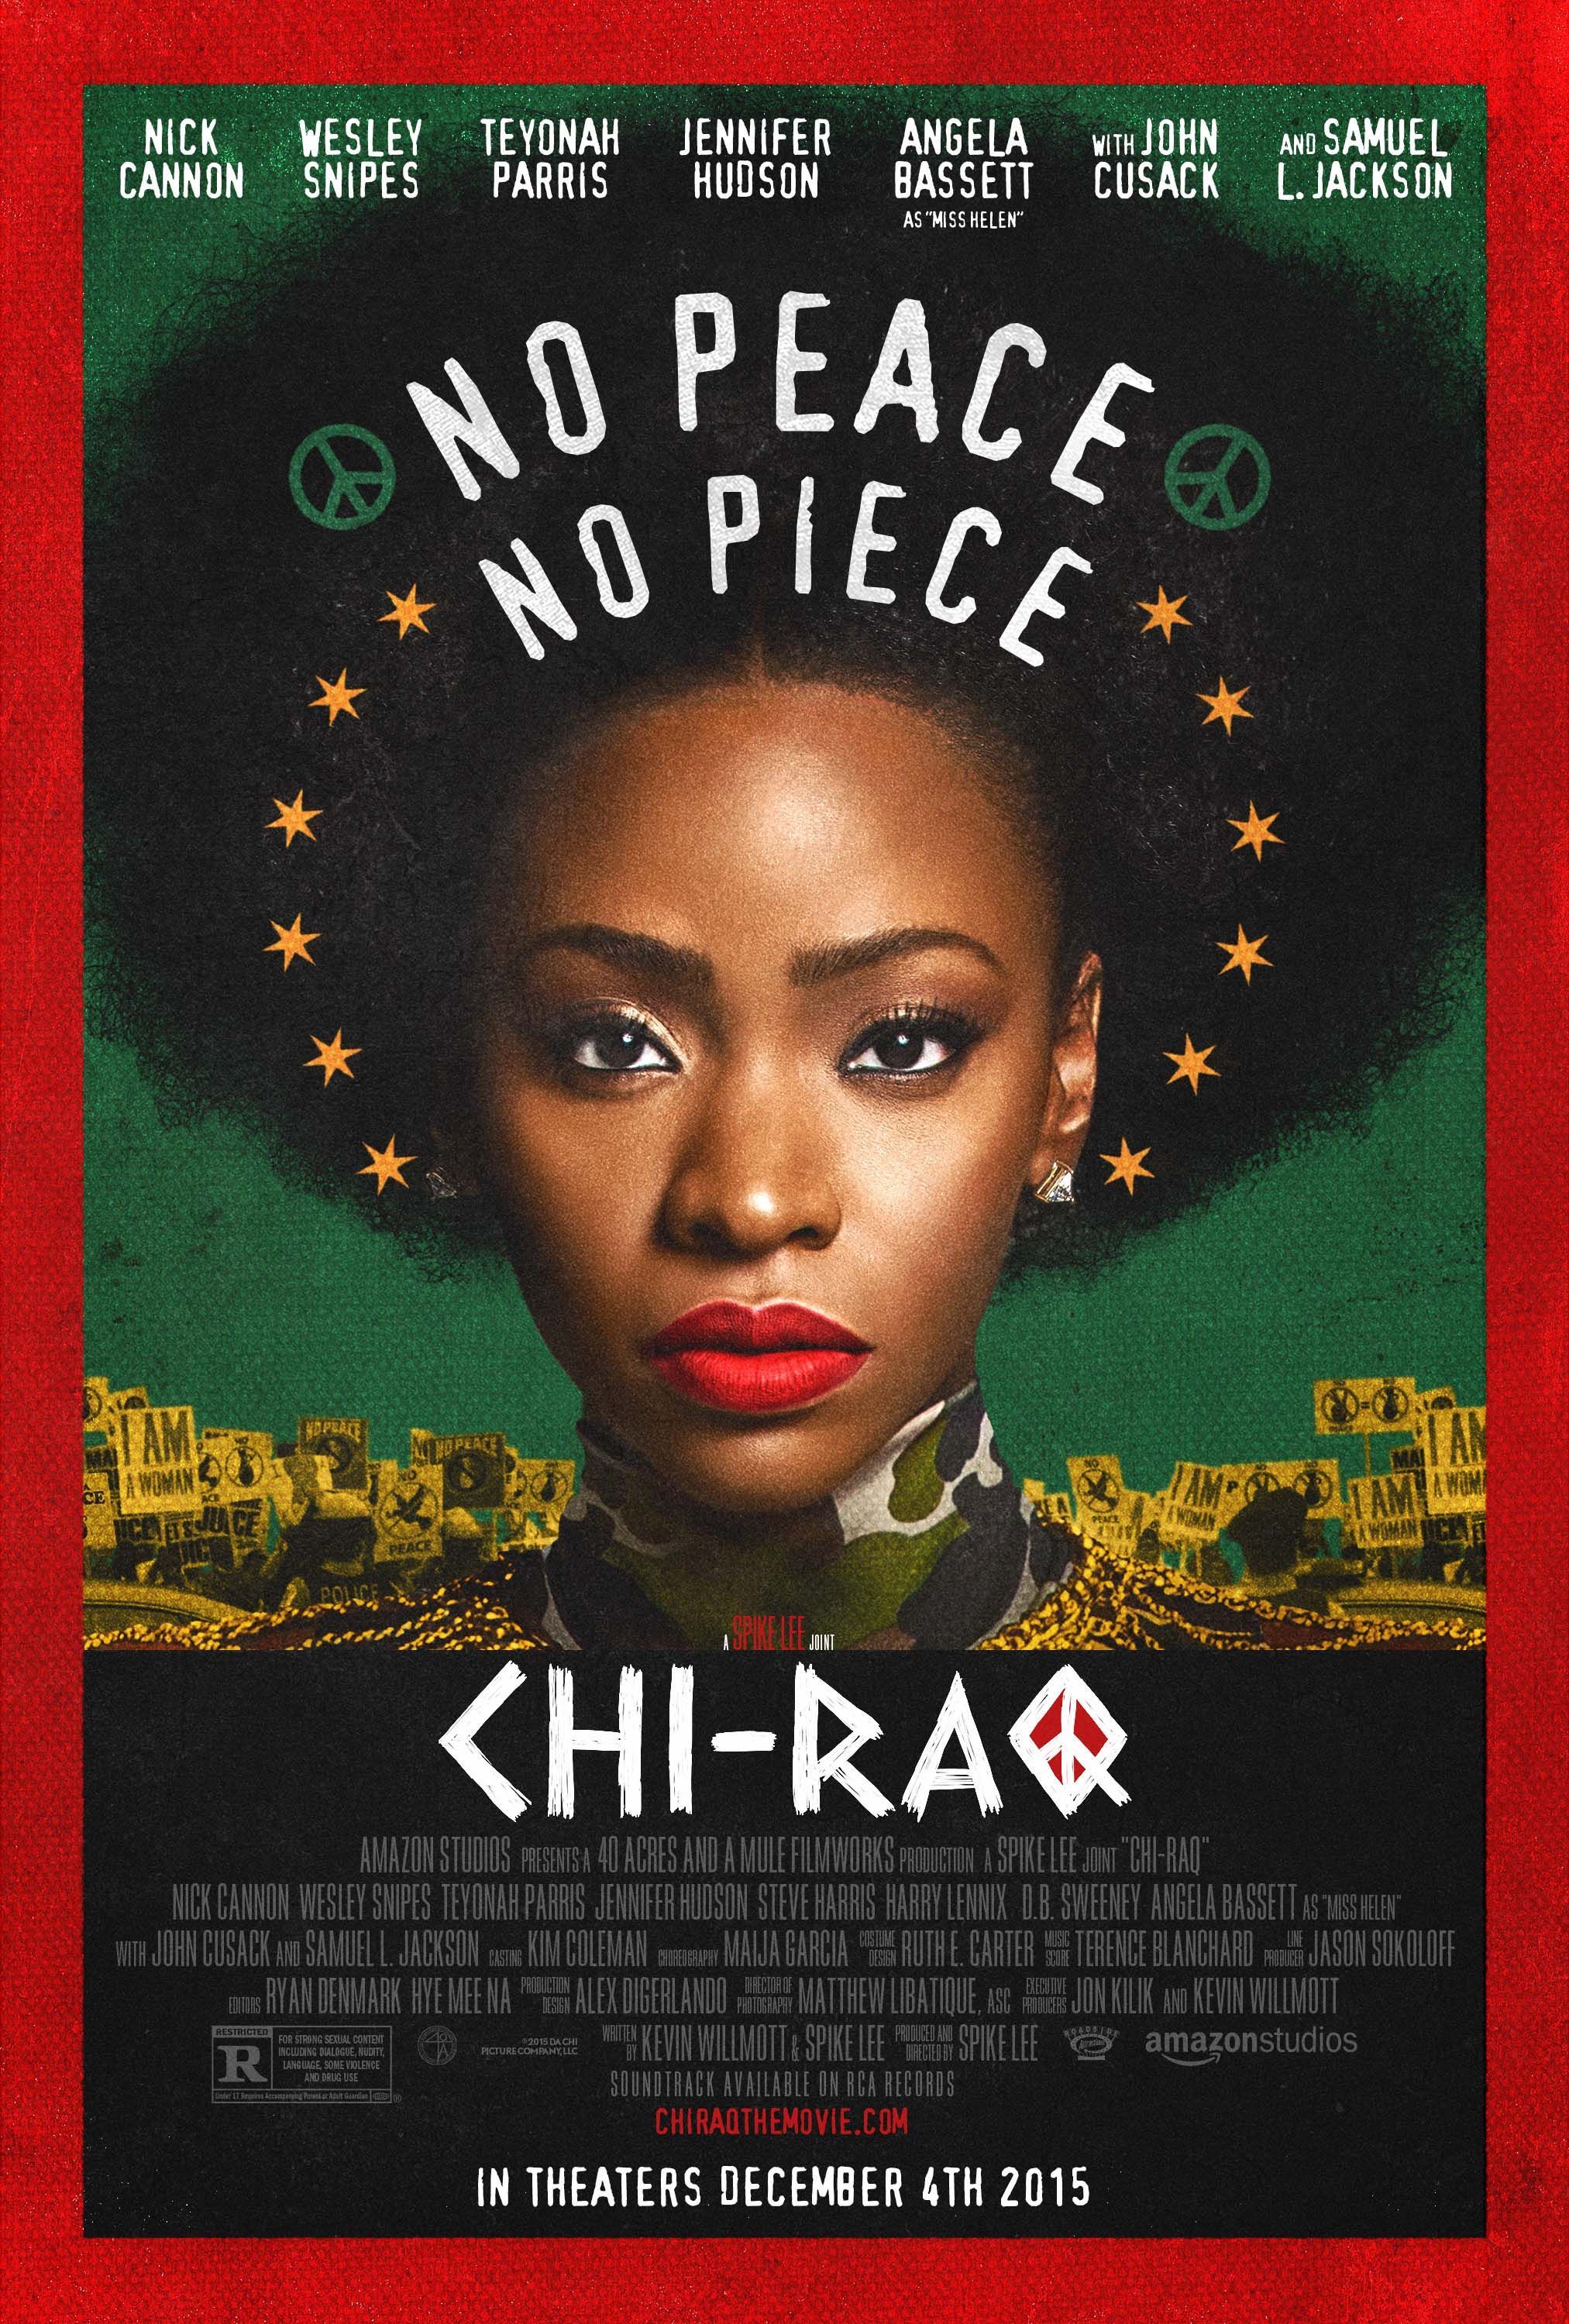 Stakes Is High: On Spike Lee’s “Chi-Raq”